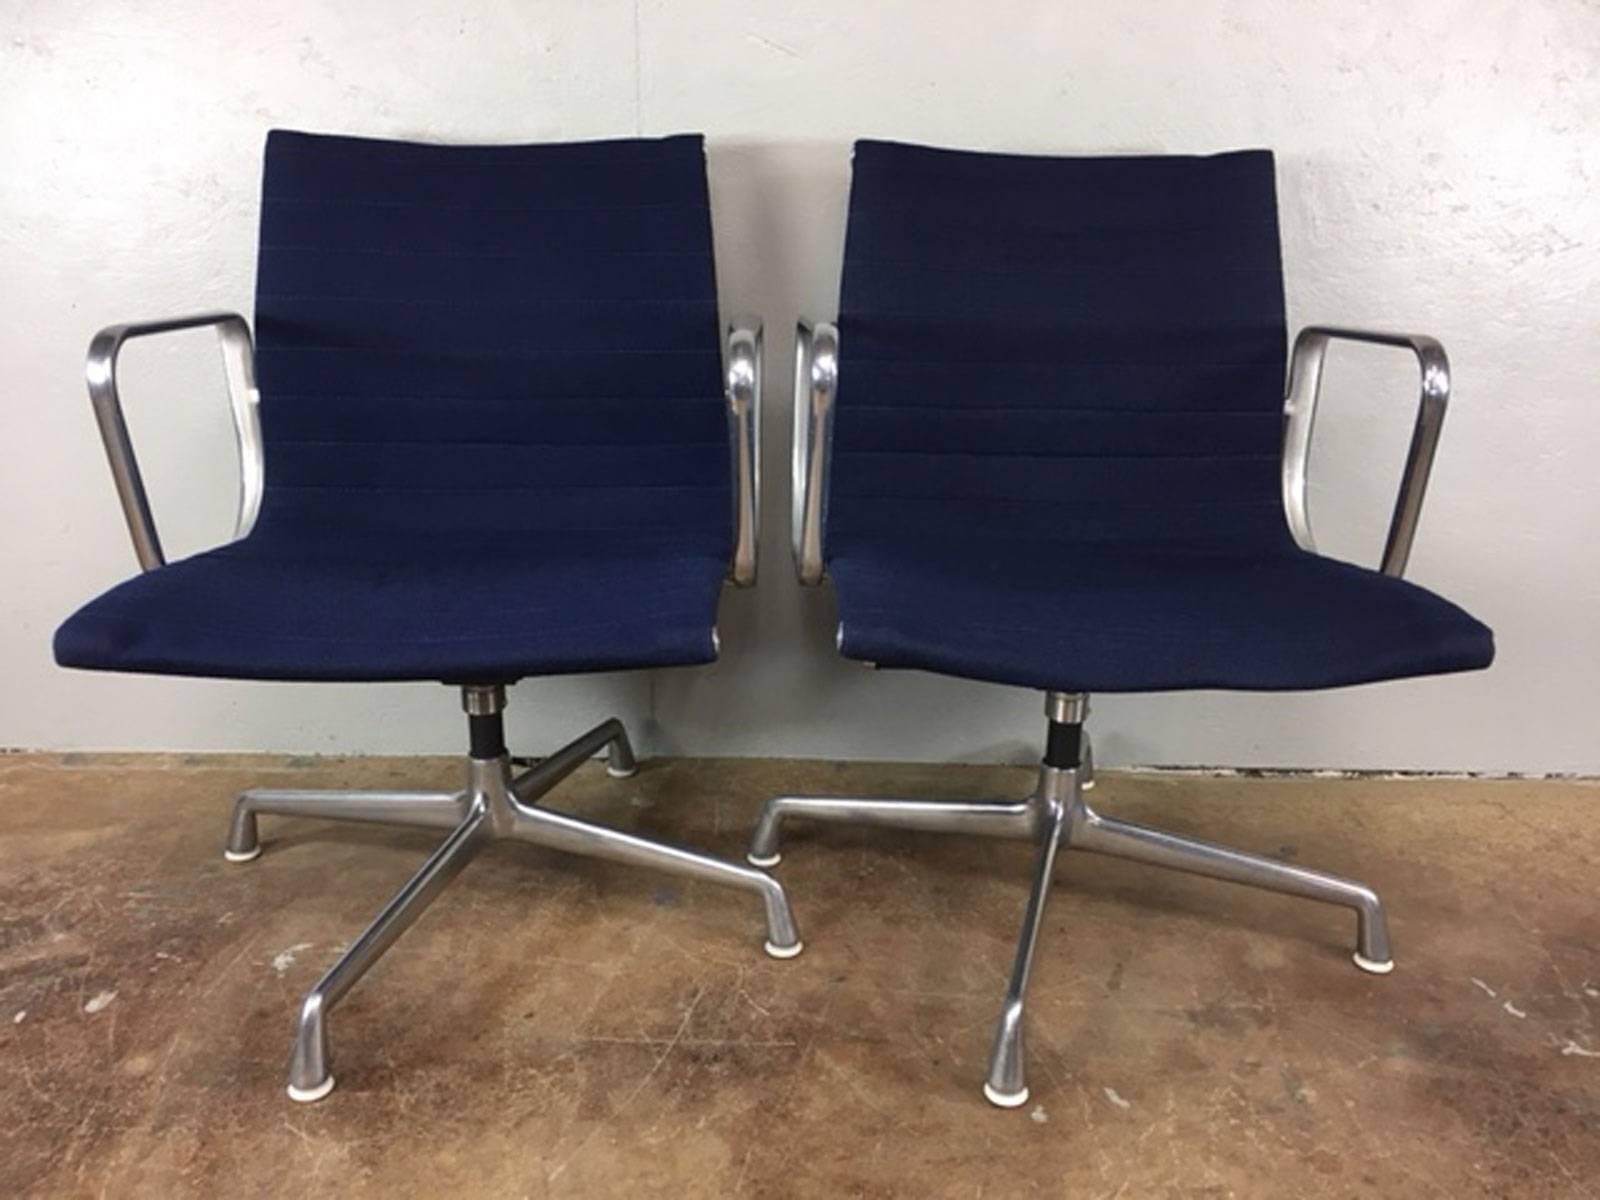 Pair of original Charles Eames soft back aluminum management chairs by Herman Miller. Brushed aluminum base on a four star base with glides. Original fabric. No rips, tears, holes, or unusual wear. Price is for the pair.